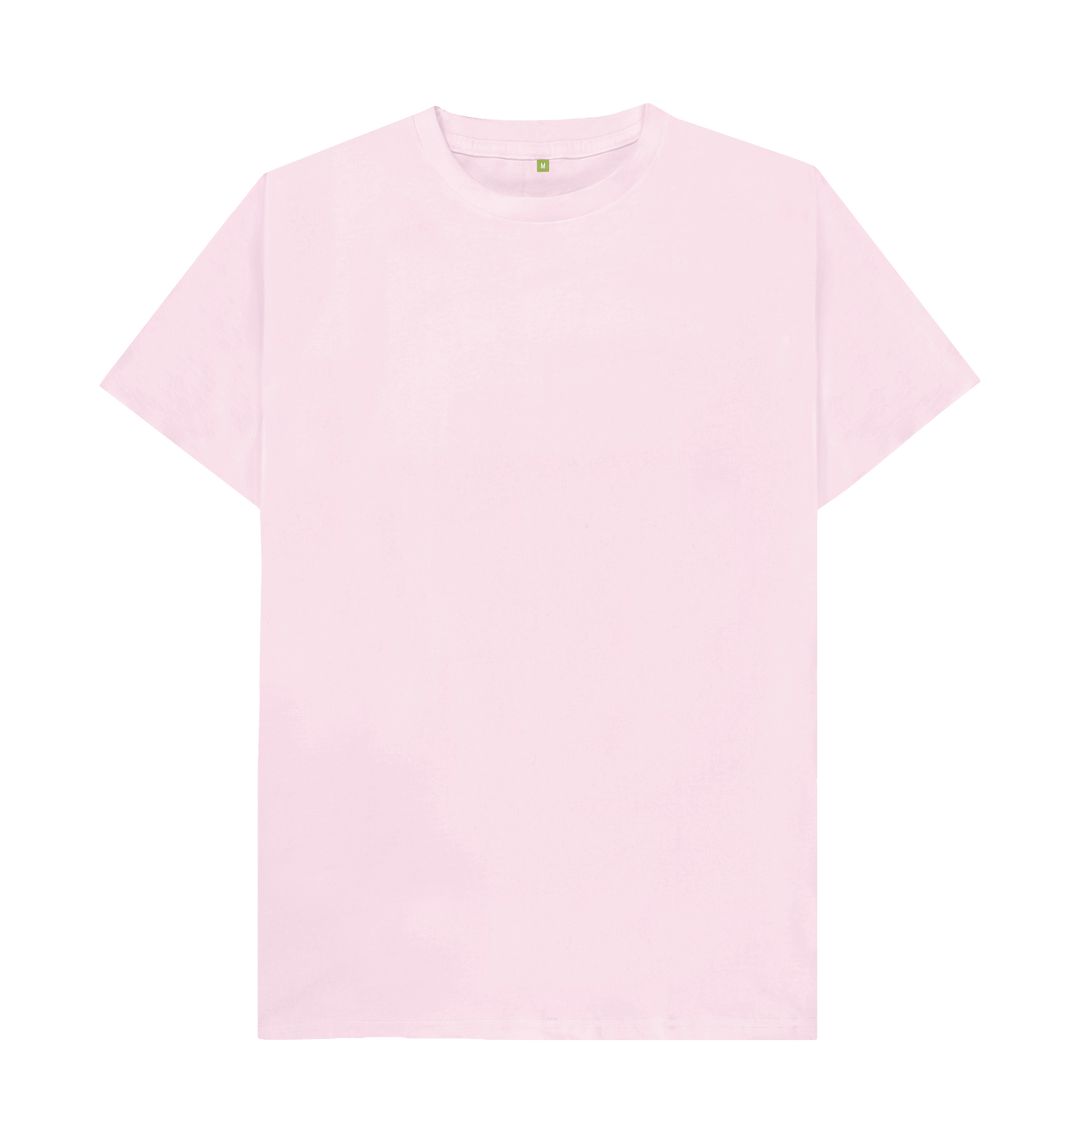 Pink Simple Stuff fitted tee